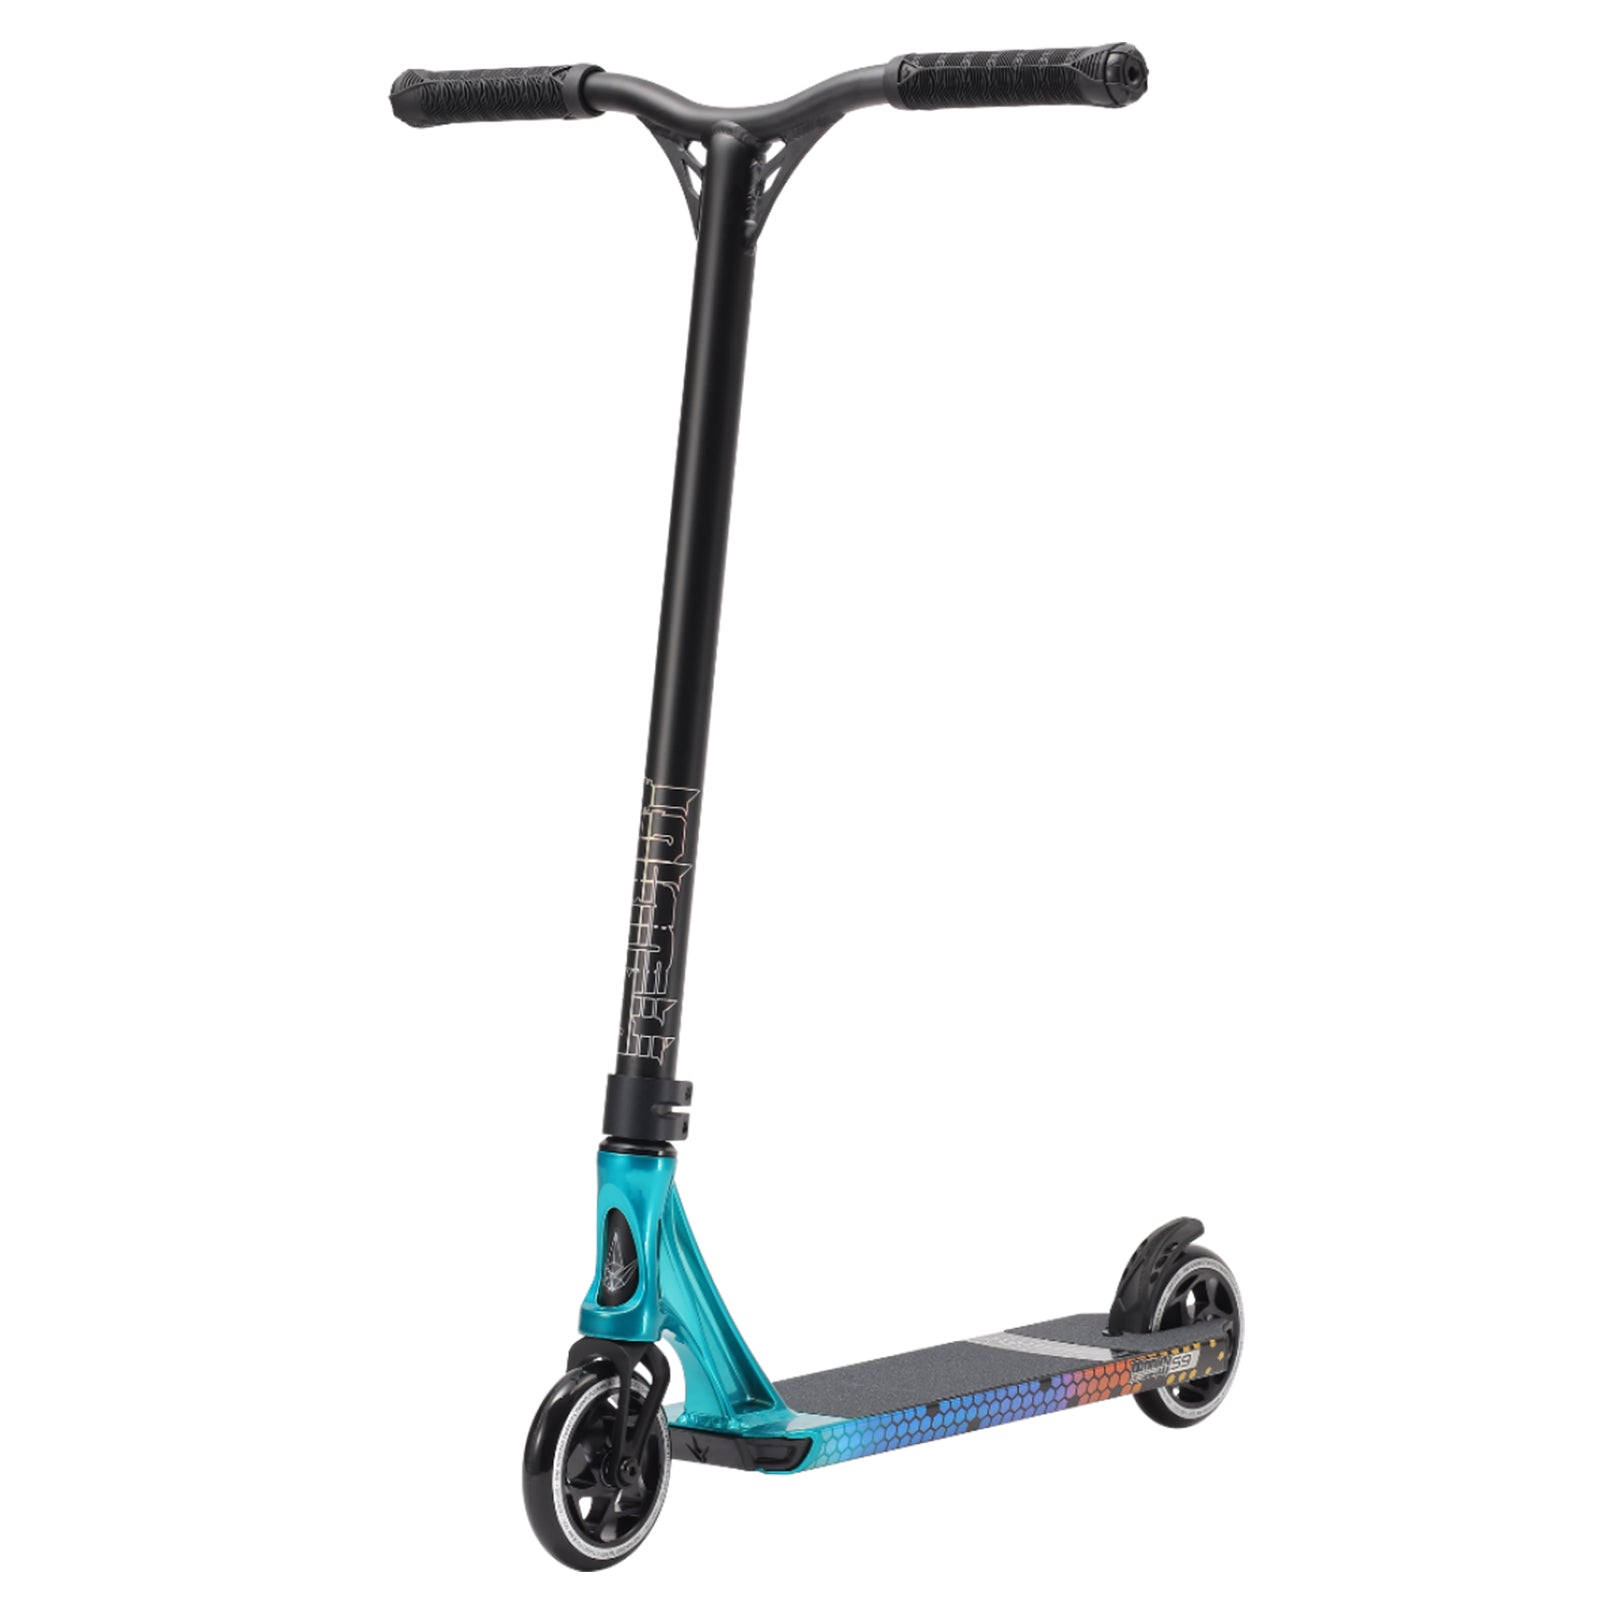 Envy Prodigy S9 Hex Complete Scooter